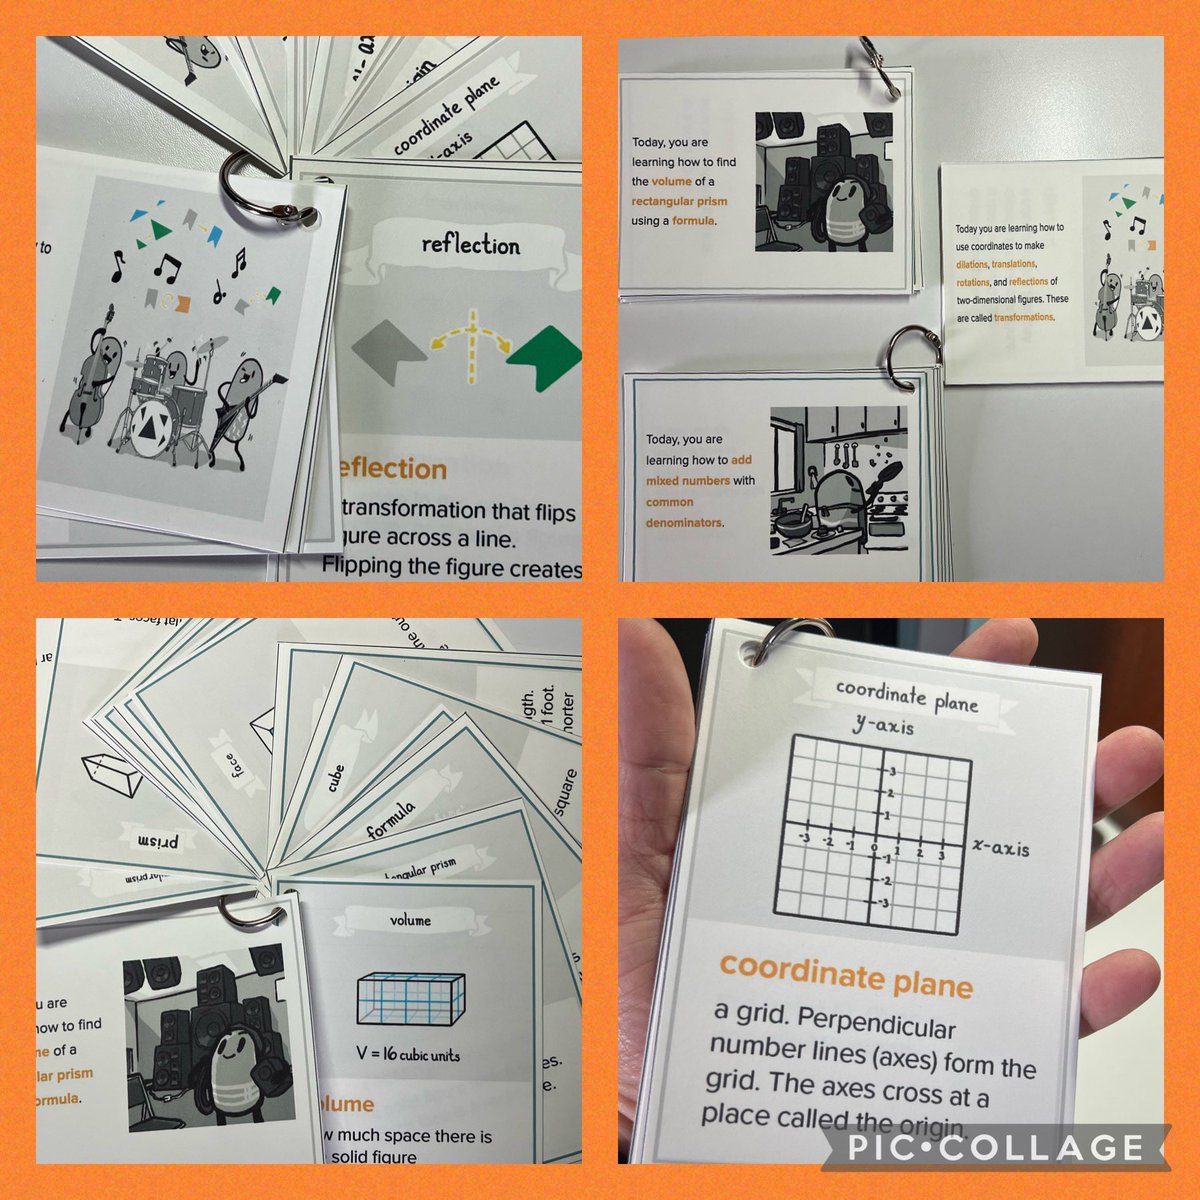 Math Journals, Vocabulary Cards, Word Walls, Exit Tickets. #TABE2022 How a Principal drove district wide gains in math implementing ELLevation Math @menxueiro @meagprinciPAL @EllevationEd @hirvaraj @TA4BE #tabe #TeamEllevation @TNTPBilingual